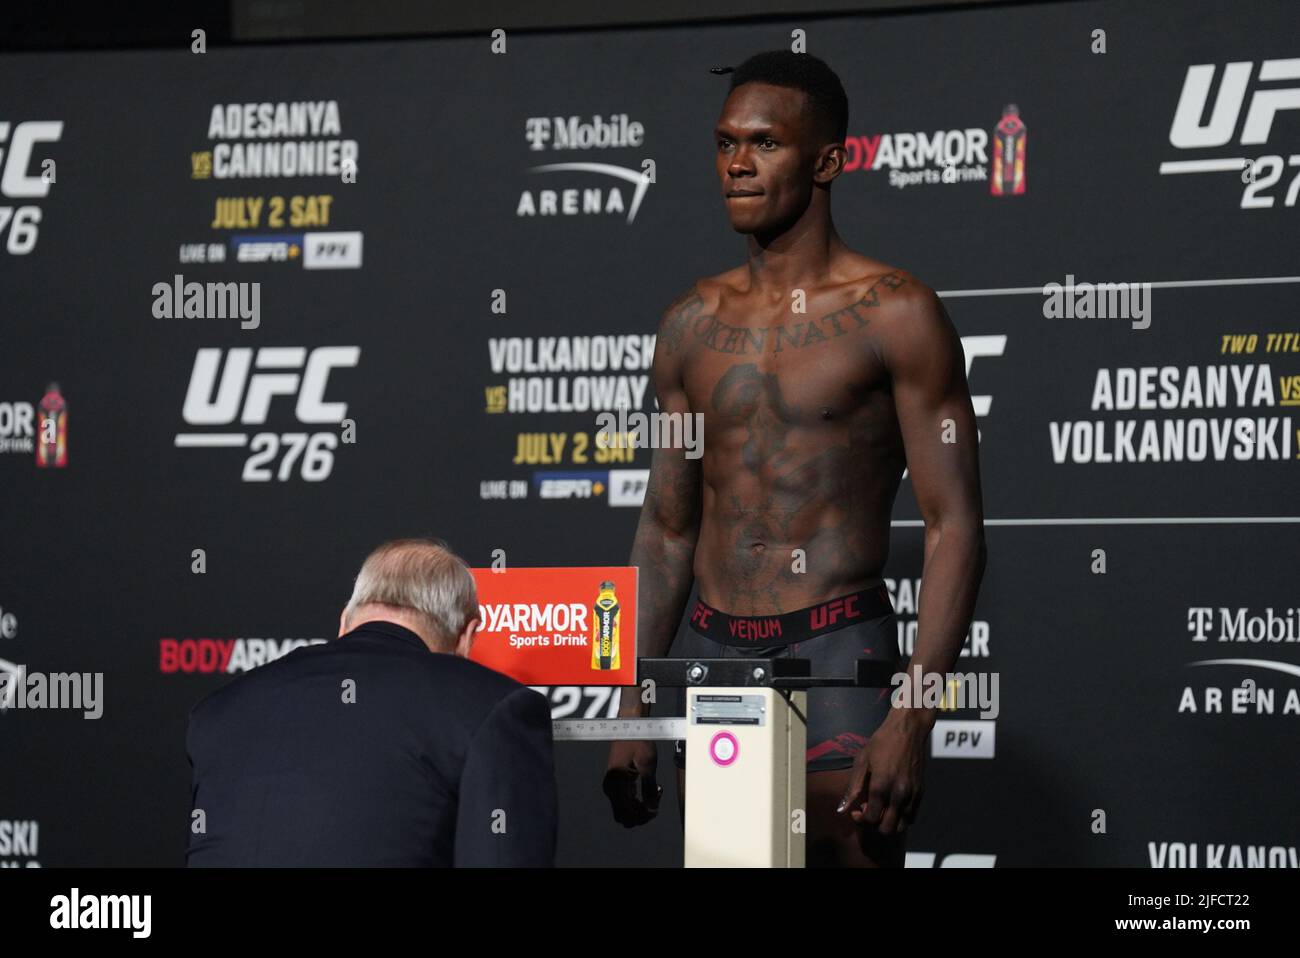 June 30, 2022, LAS VEGAS, NV, LAS VEGAS, NV, United States: LAS VEGAS, NV - June 1: Israel Adesanya steps on the scale for the official weigh-ins at T-Mobile Arena for UFC 276 on June 1, 2022 in LAS VEGAS, NV, United States. (Credit Image: © Louis Grasse/PX Imagens via ZUMA Press Wire) Stock Photo